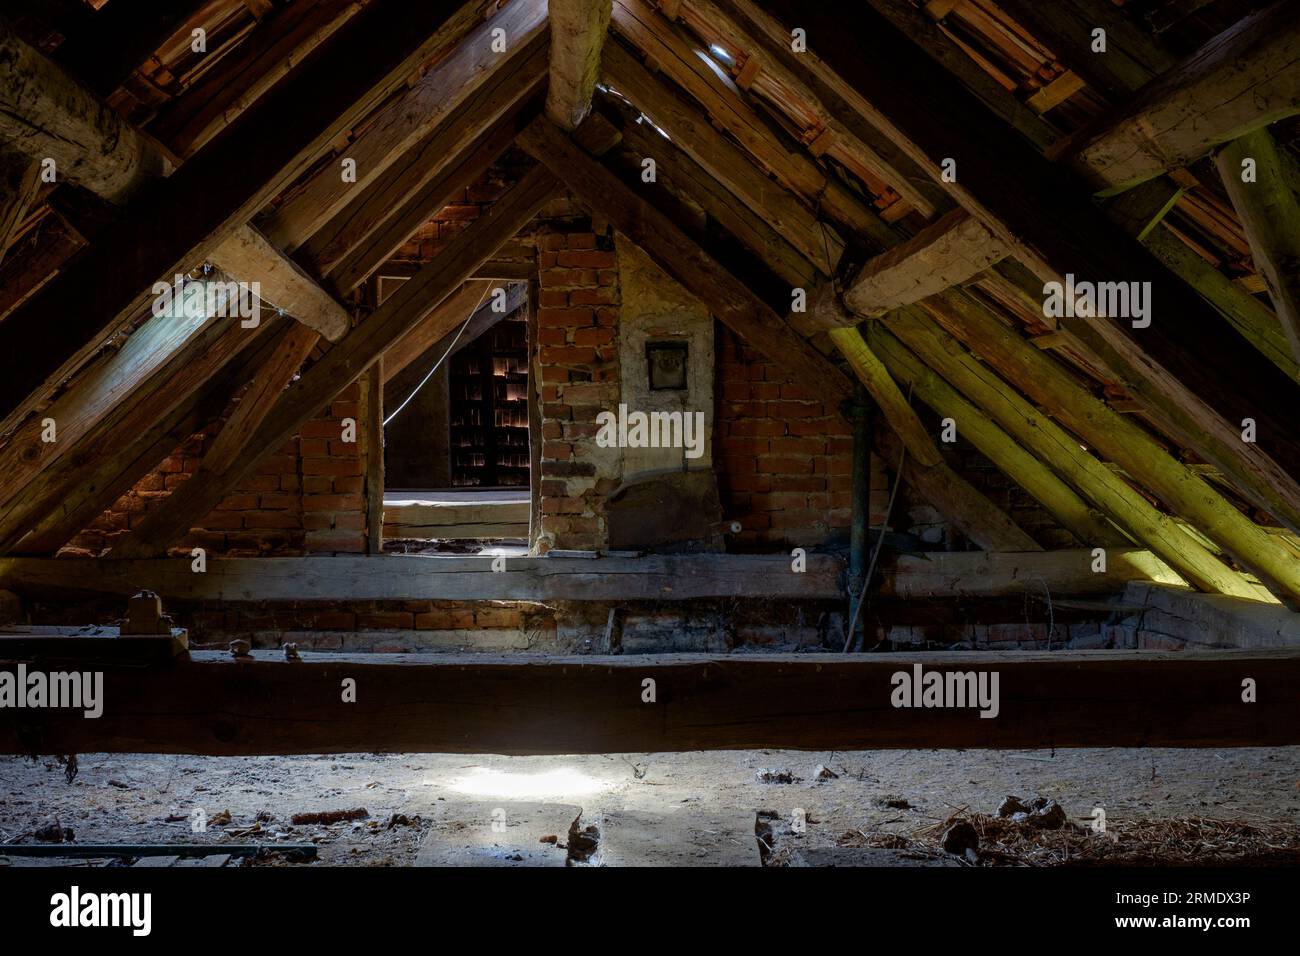 attic loft of typical 1950s built rural hungarian house with wooden beams tiled roof Stock Photo